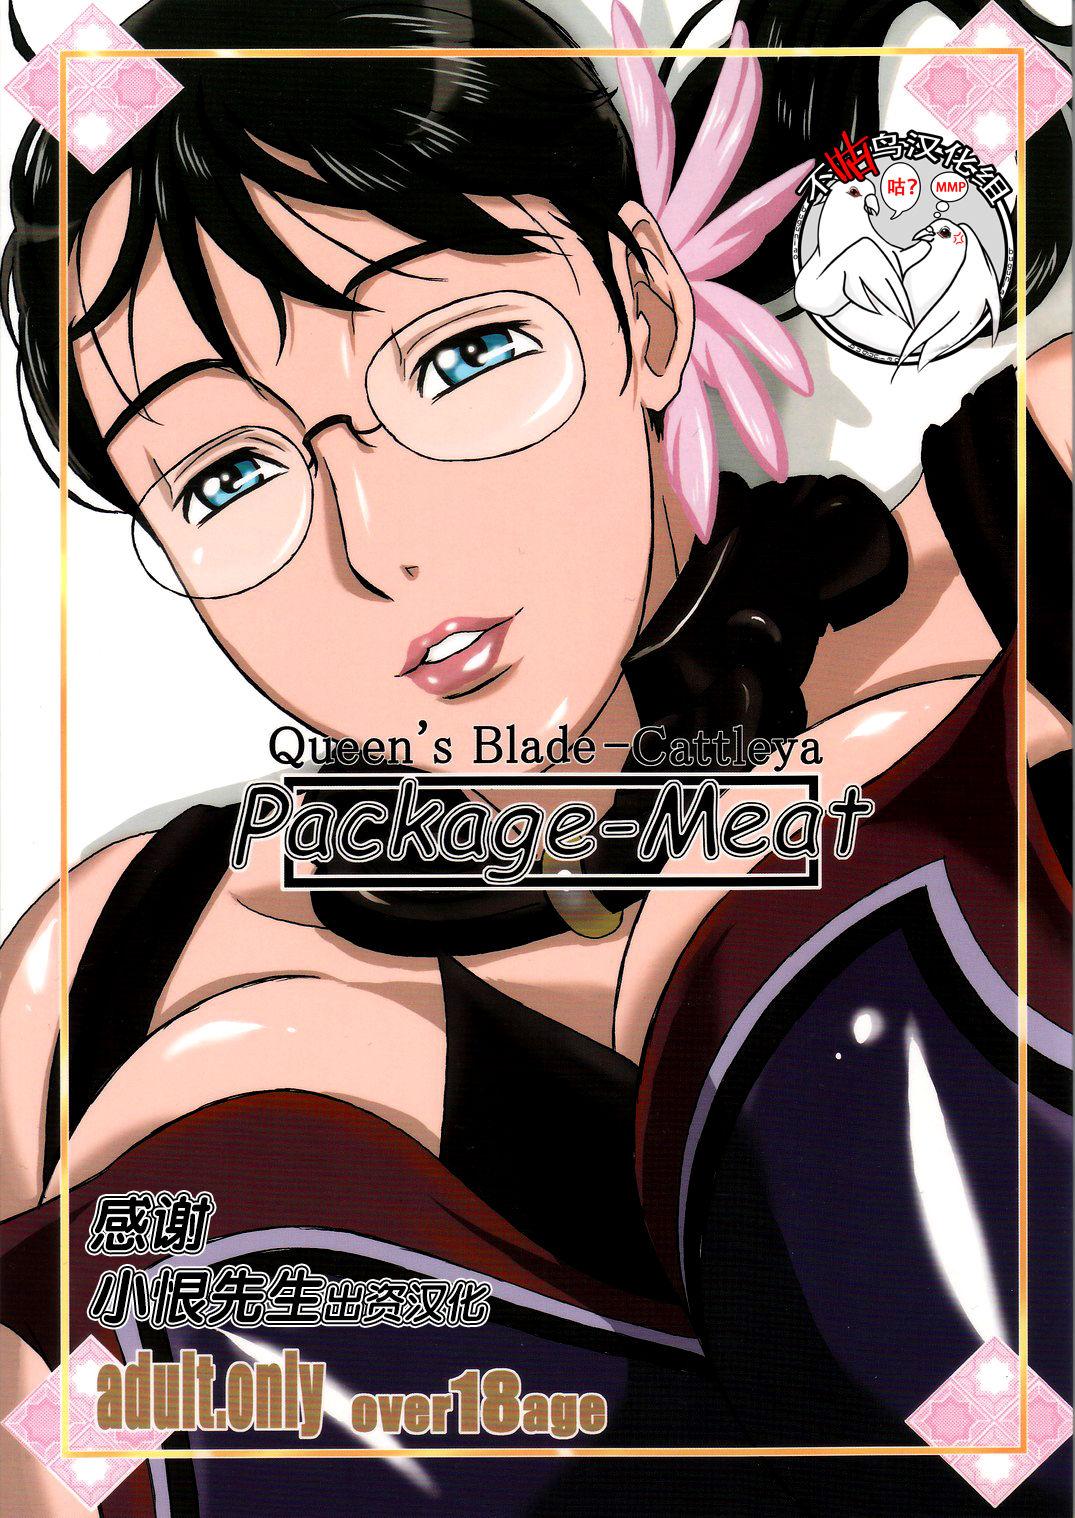 (C72) [Shiawase Pullin Dou (Ninroku)] Package Meat (Queen's Blade) [Chinese] amateur coloring version 0